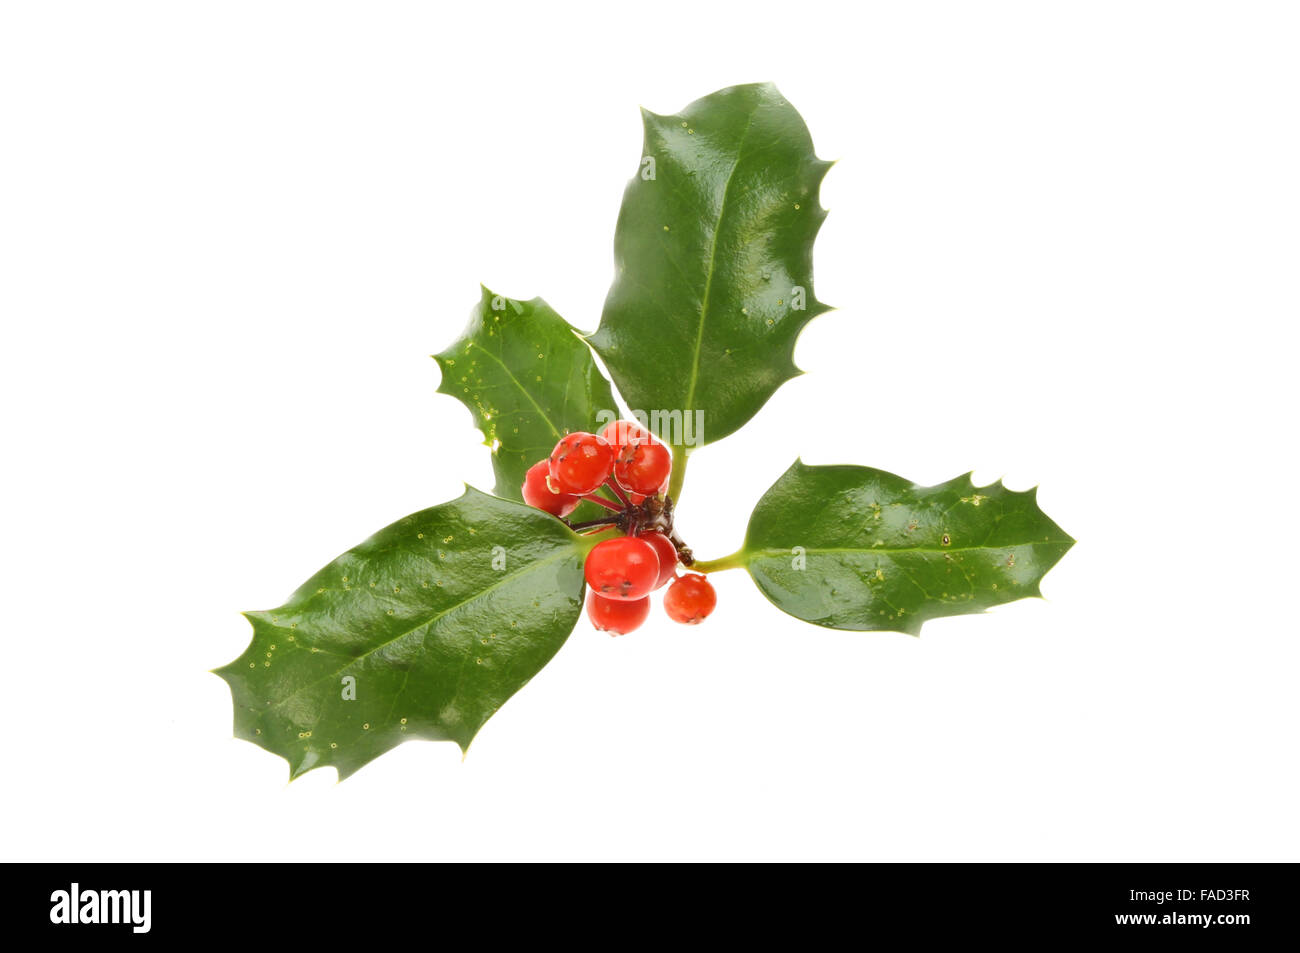 Holly with red ripe berries Stock Photo